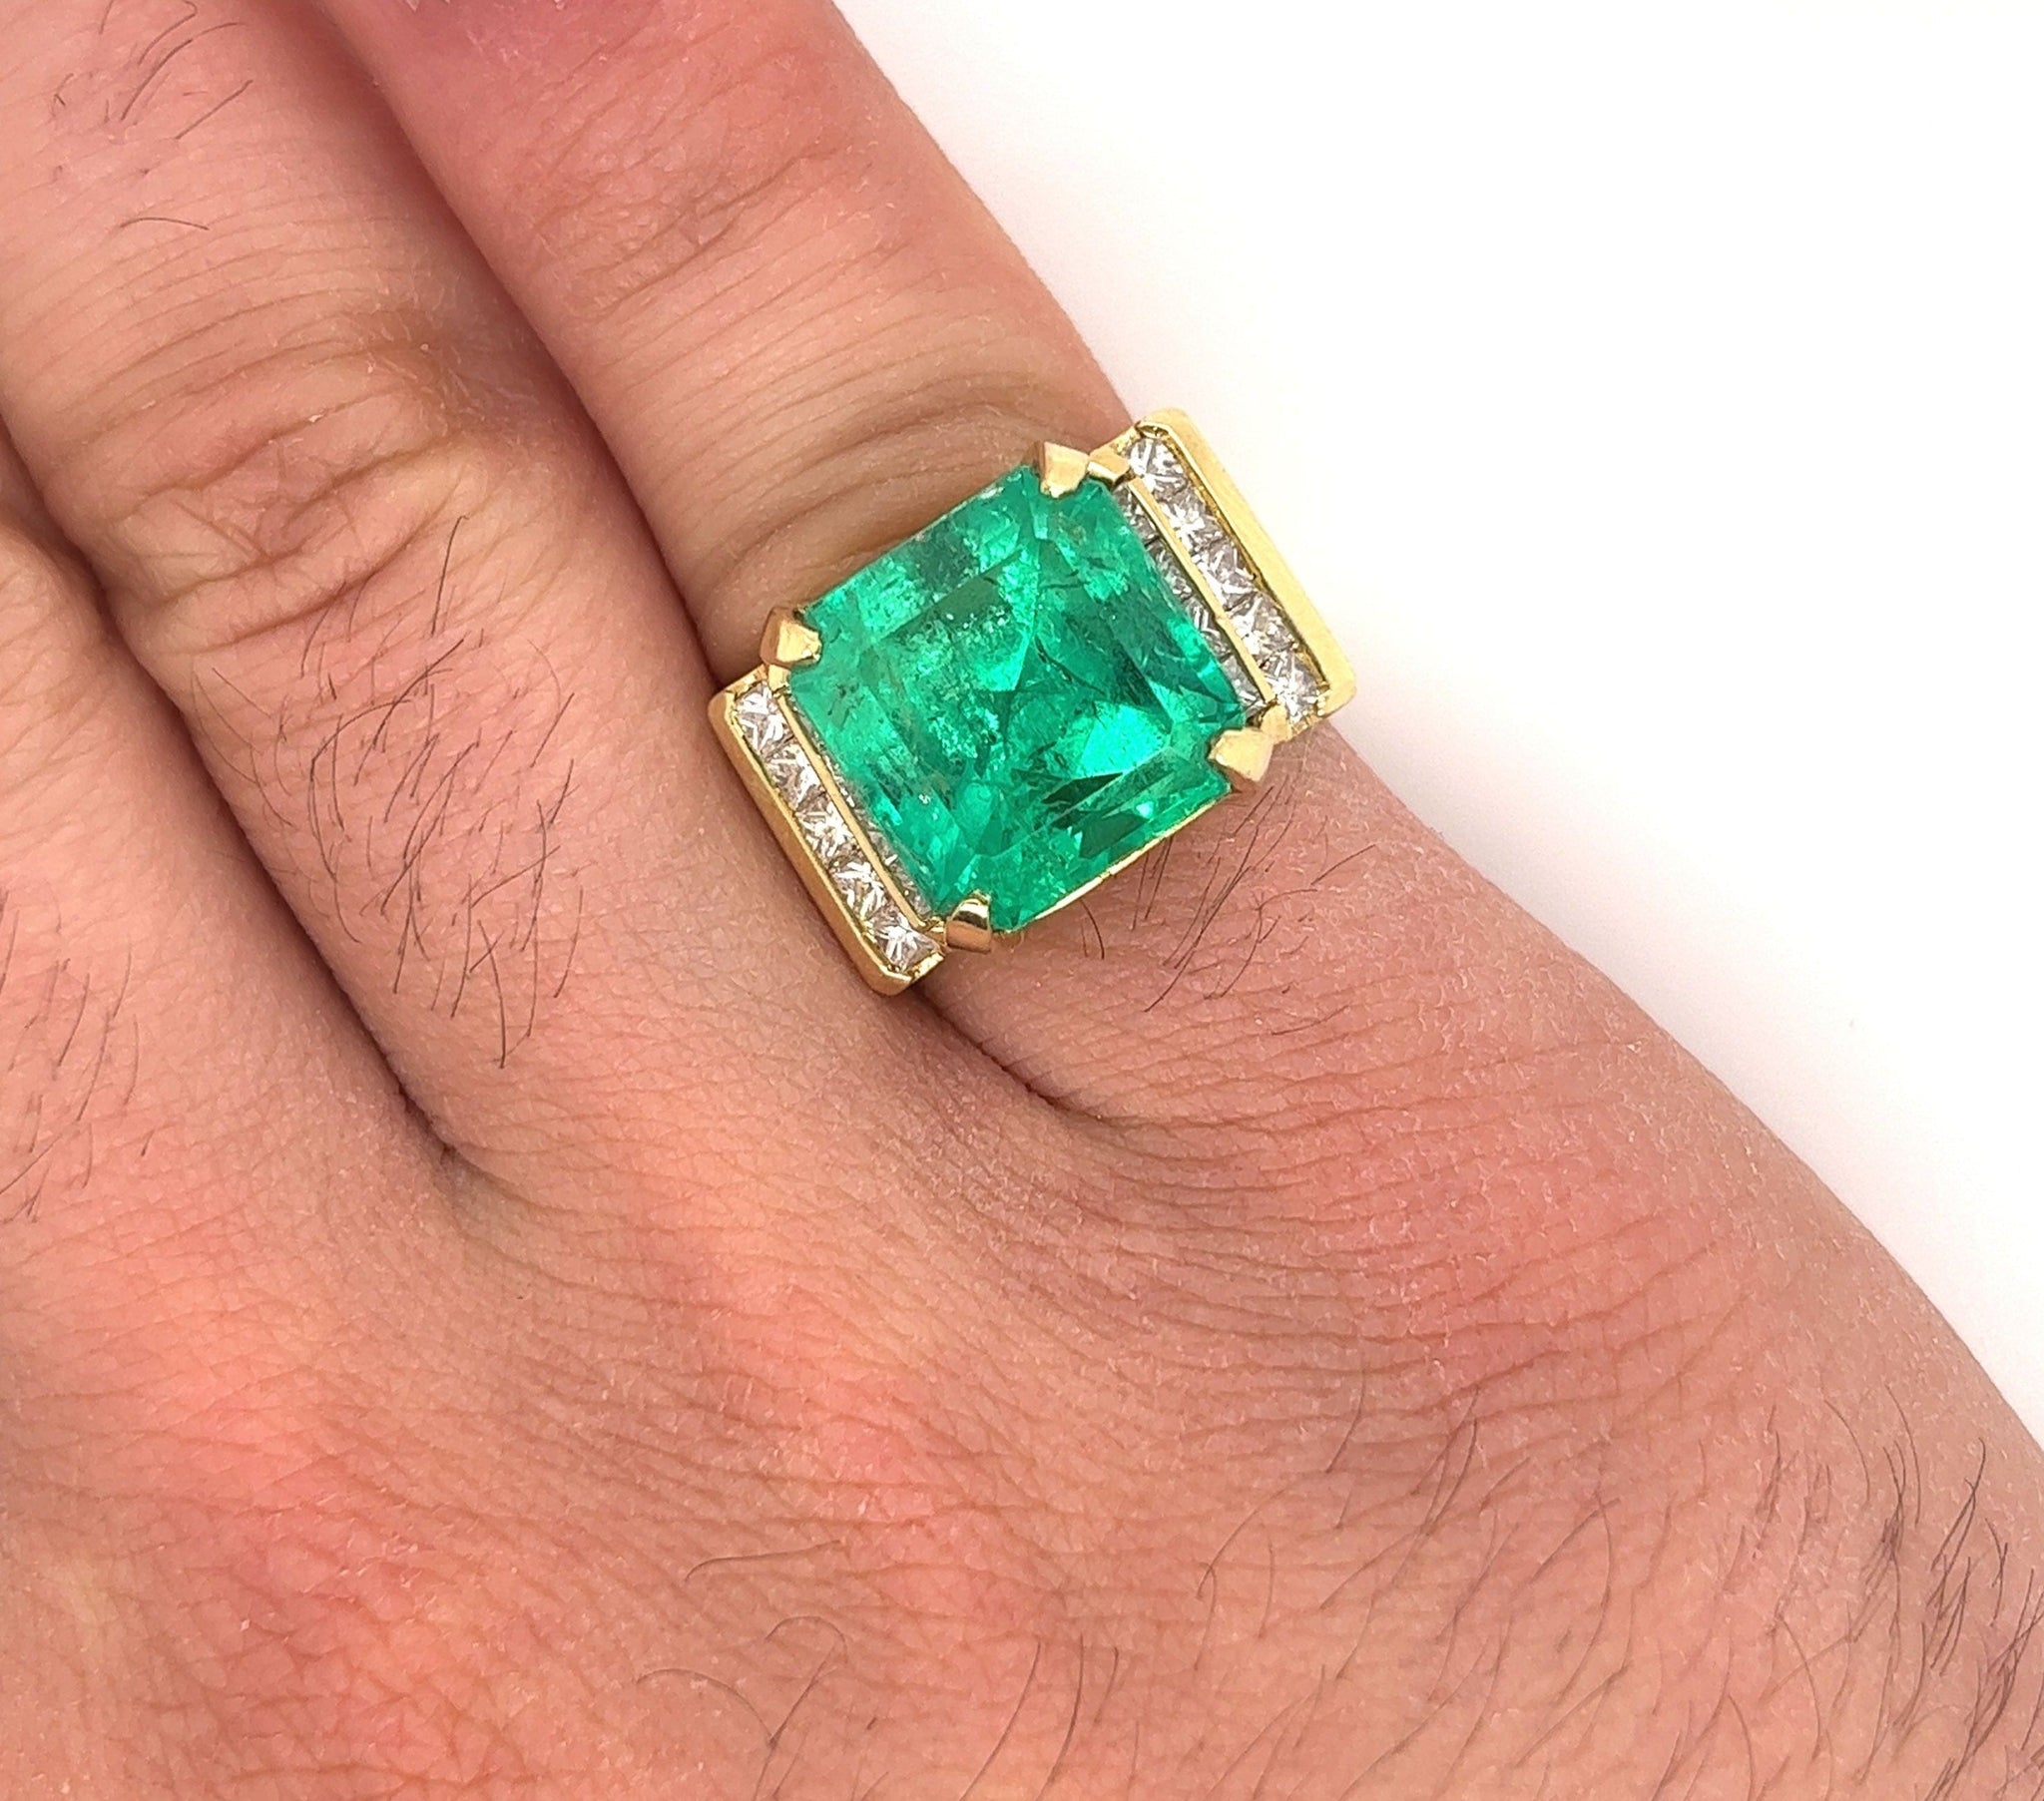 GIA Certified 13 Carat Colombian Emerald Mens Ring in 18K Gold With Princess Cut Diamonds Rings